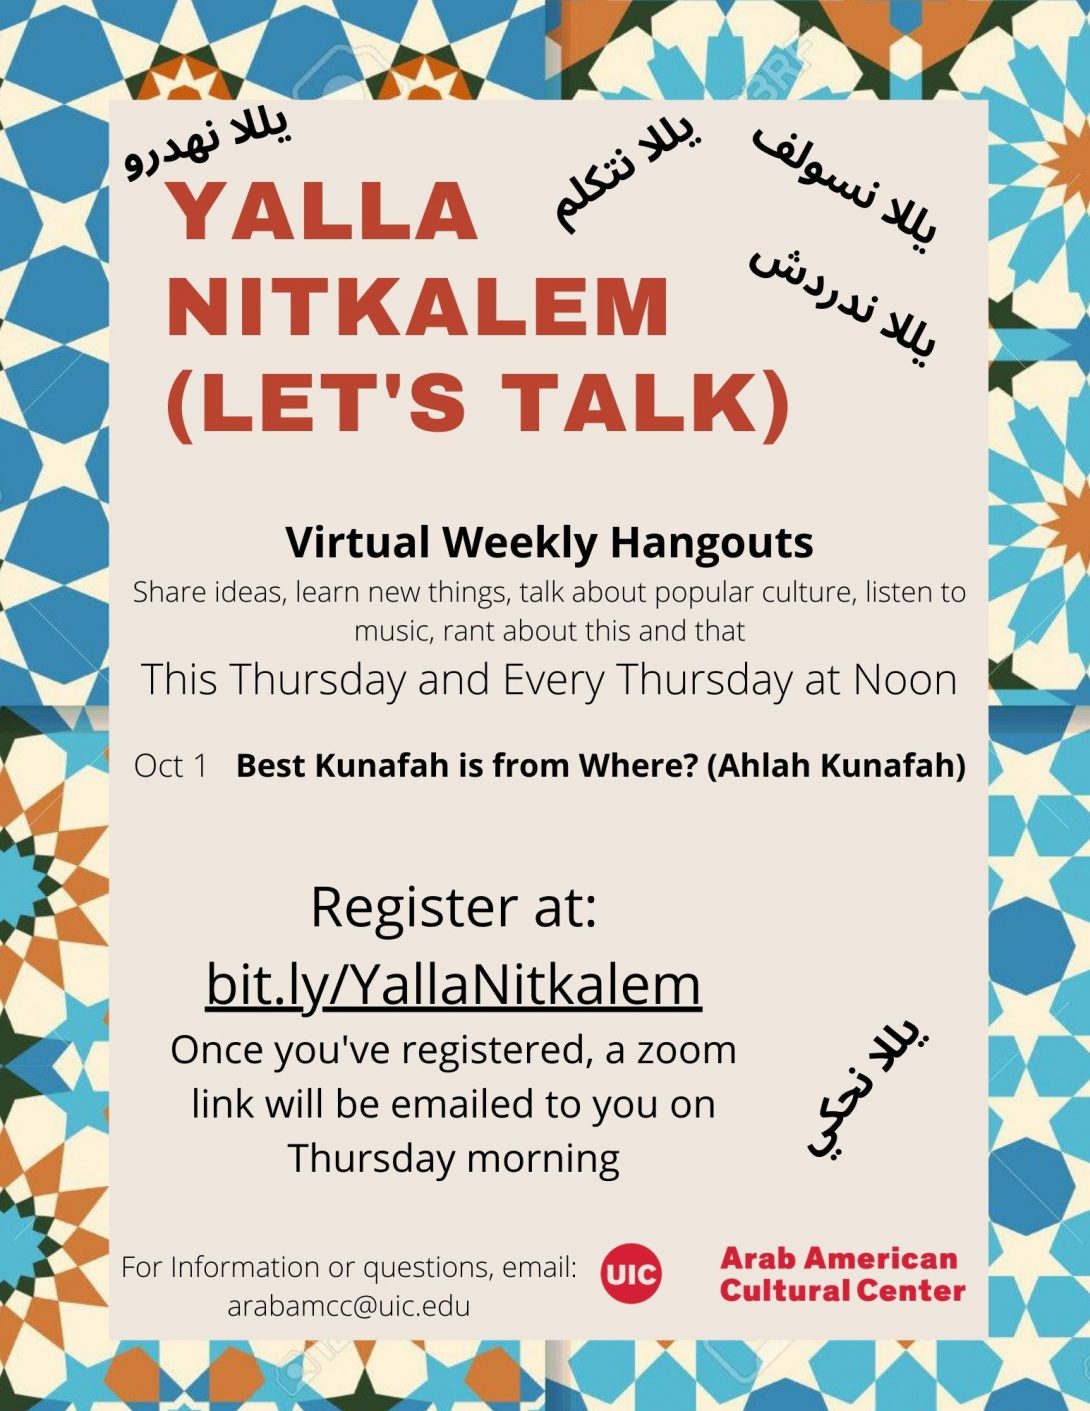 Colorful border around the image with blue, light orange and beige tiles. In the middle the flyer lists the name of the event Yalla NitKalem, information about when it is and the topics per day. Center logo is on the bottom right. Registeration information is on the close to bottom left followed by contact information. Different arabic dialect translations of the words Yalla Nitkalem (let's Talk) is sprinkled throughout in black lettering